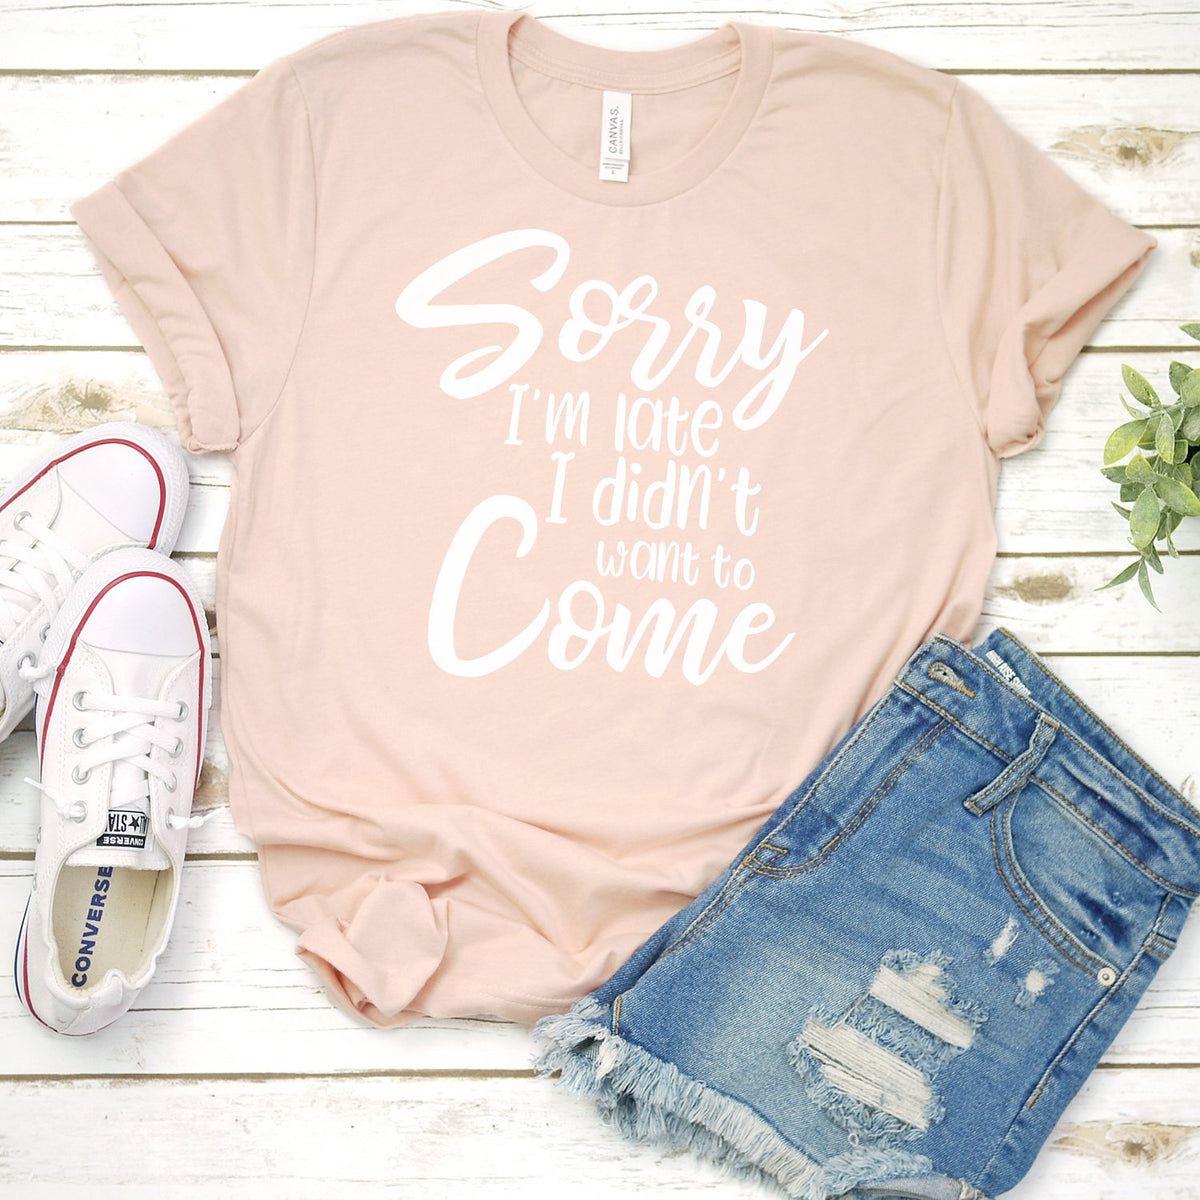 Sorry I&#39;m Late I didn&#39;t Want to Come - Short Sleeve Tee Shirt